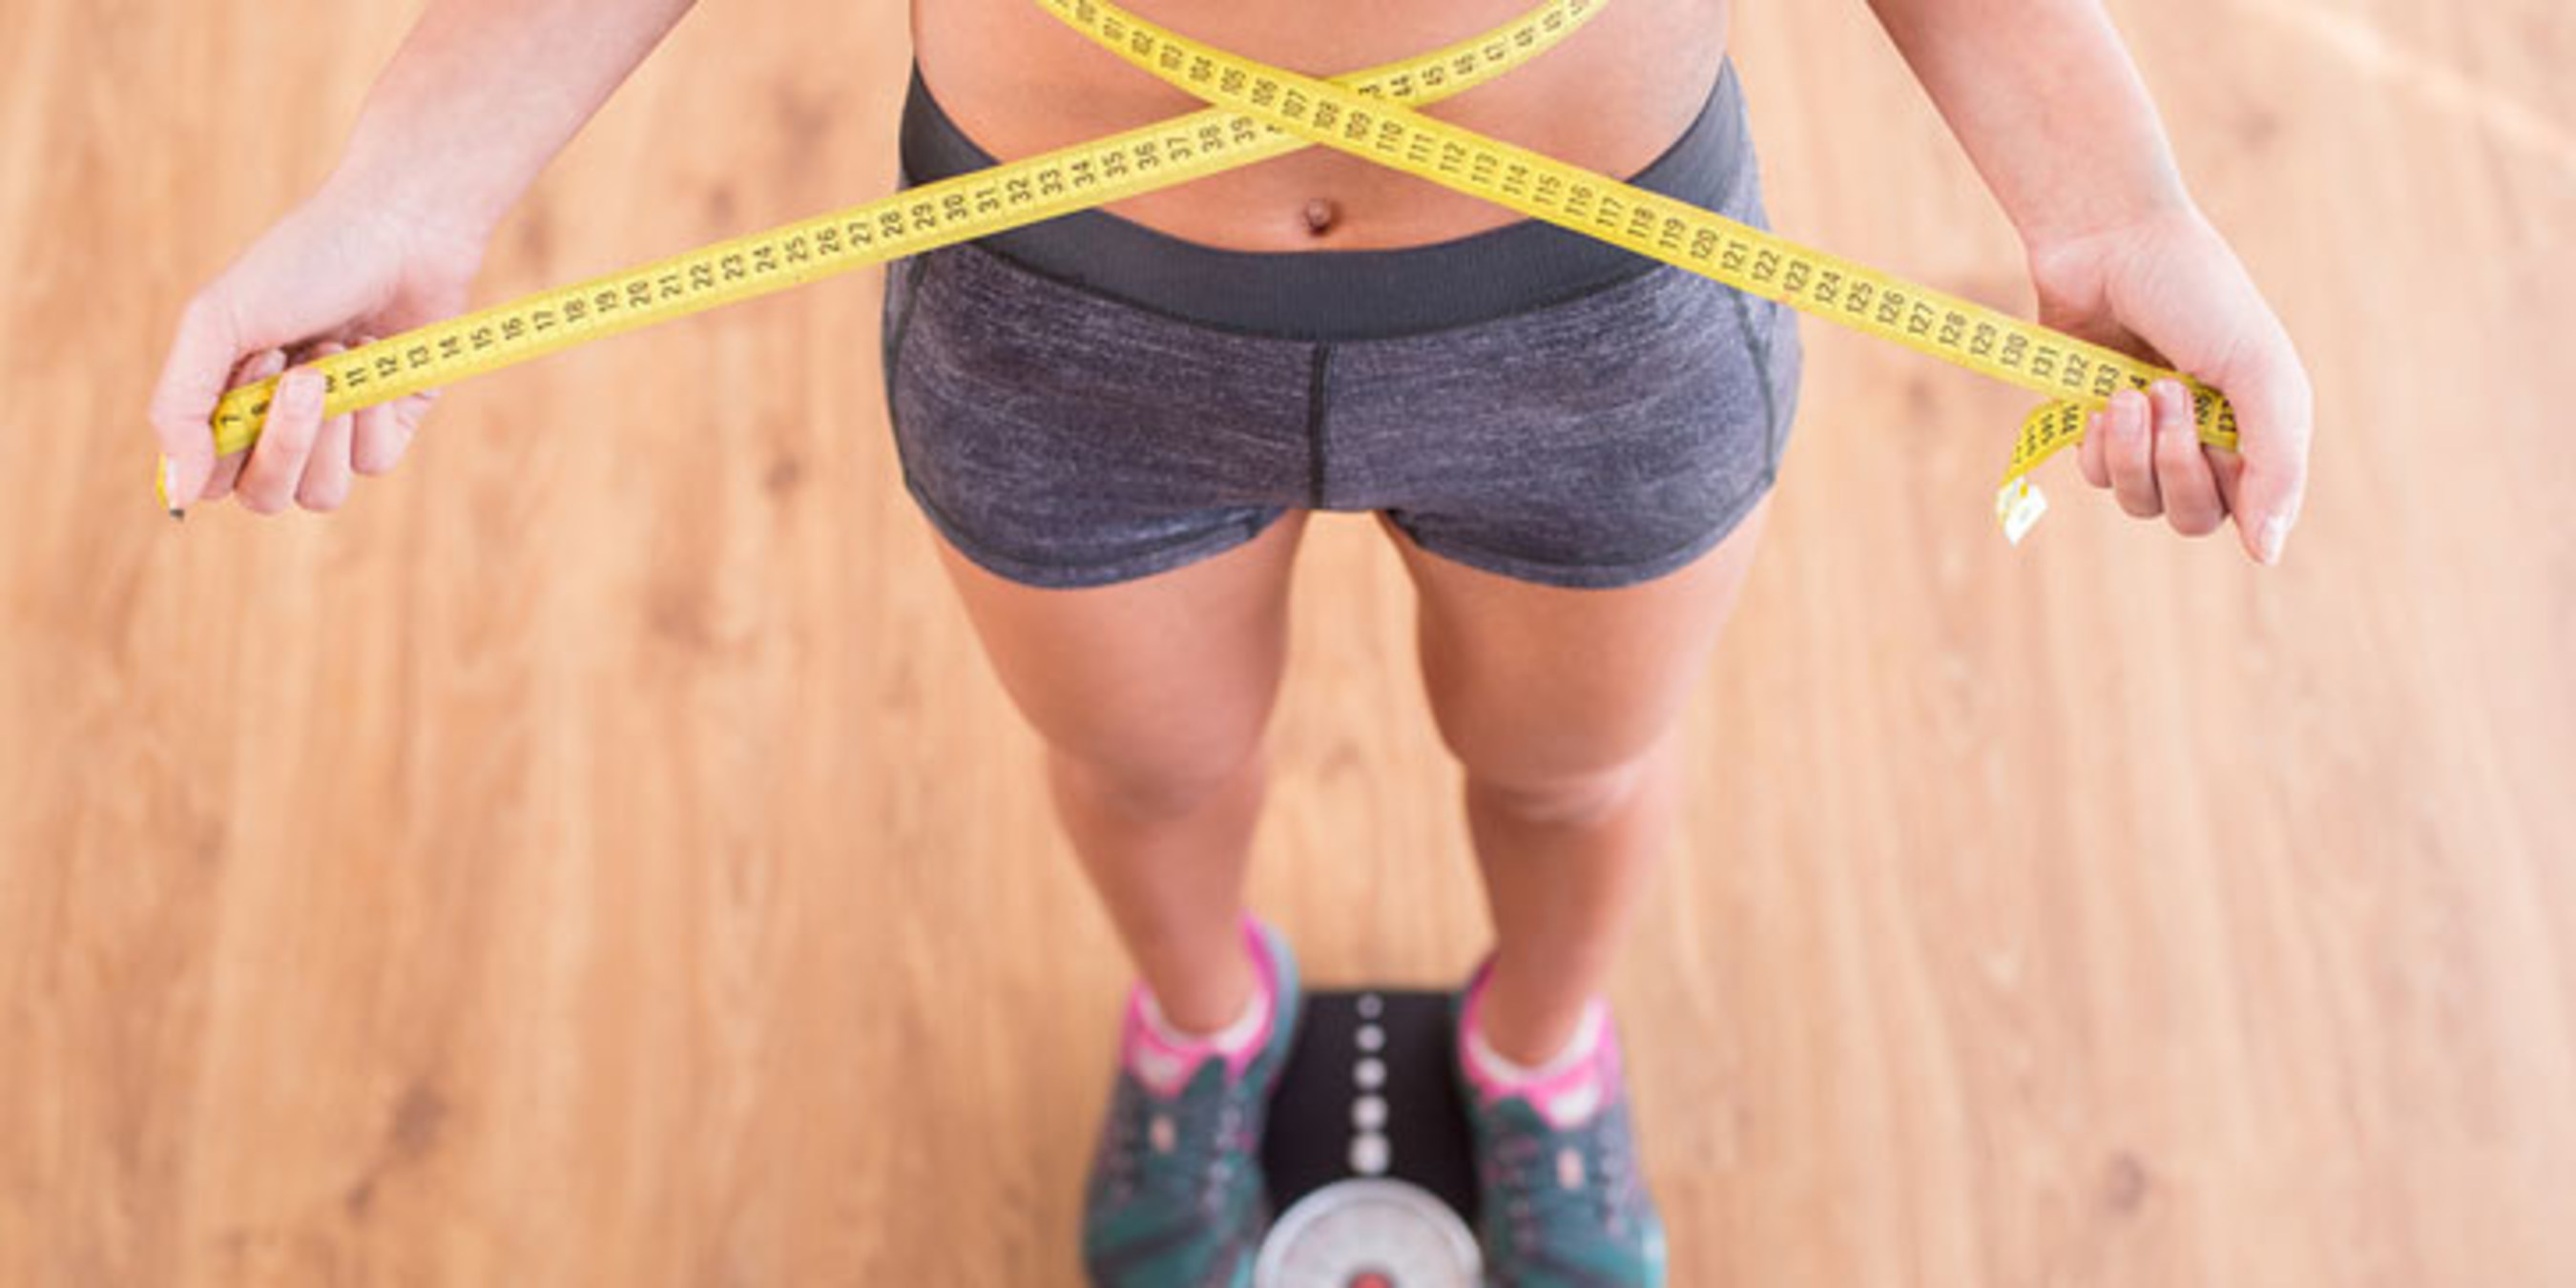 Lose weight fast with these scientifically proven tricks